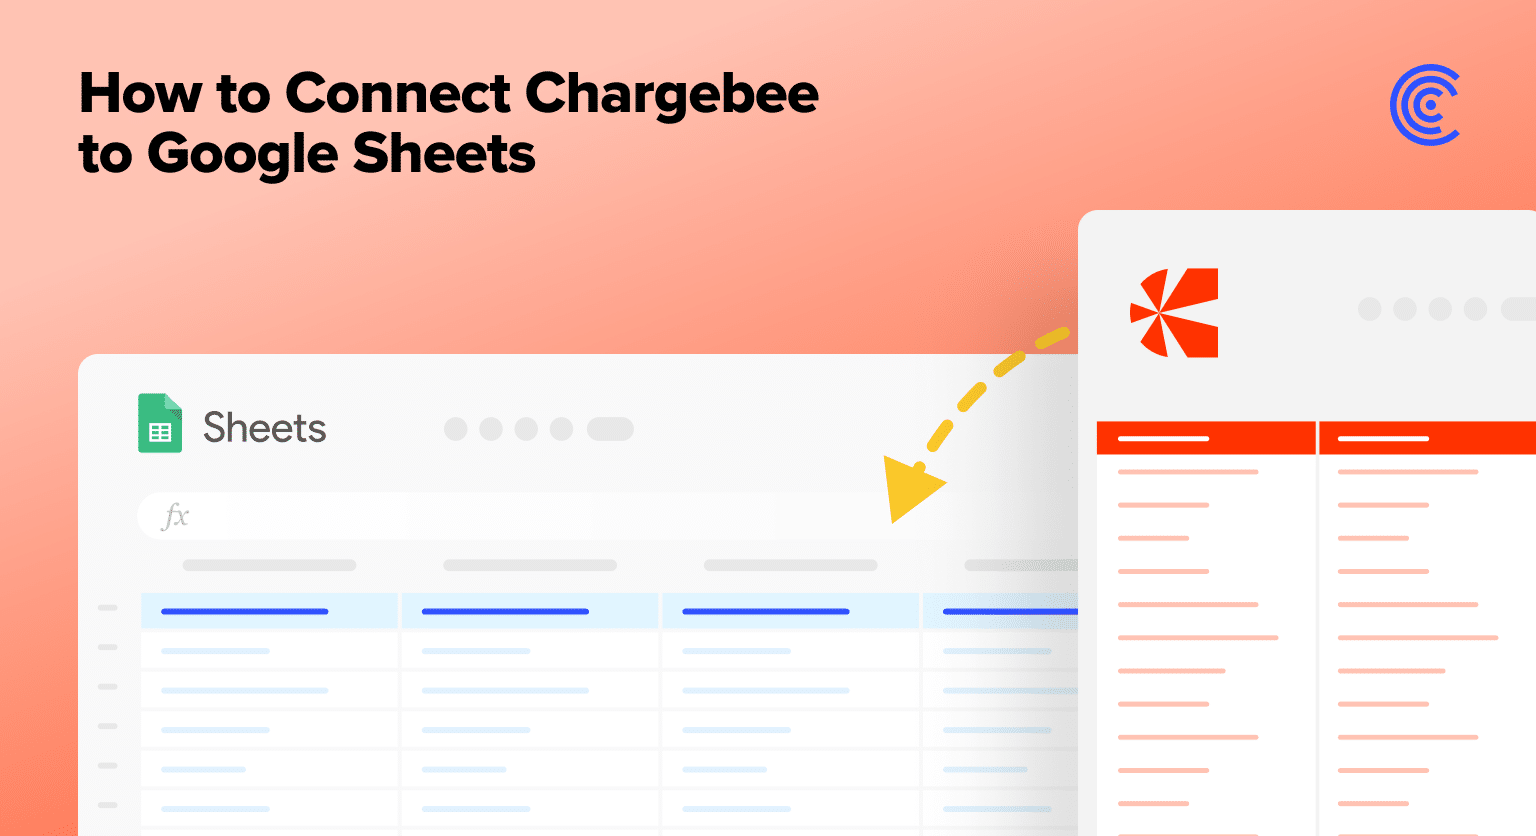 How to Connect Chargebee to Google Sheets